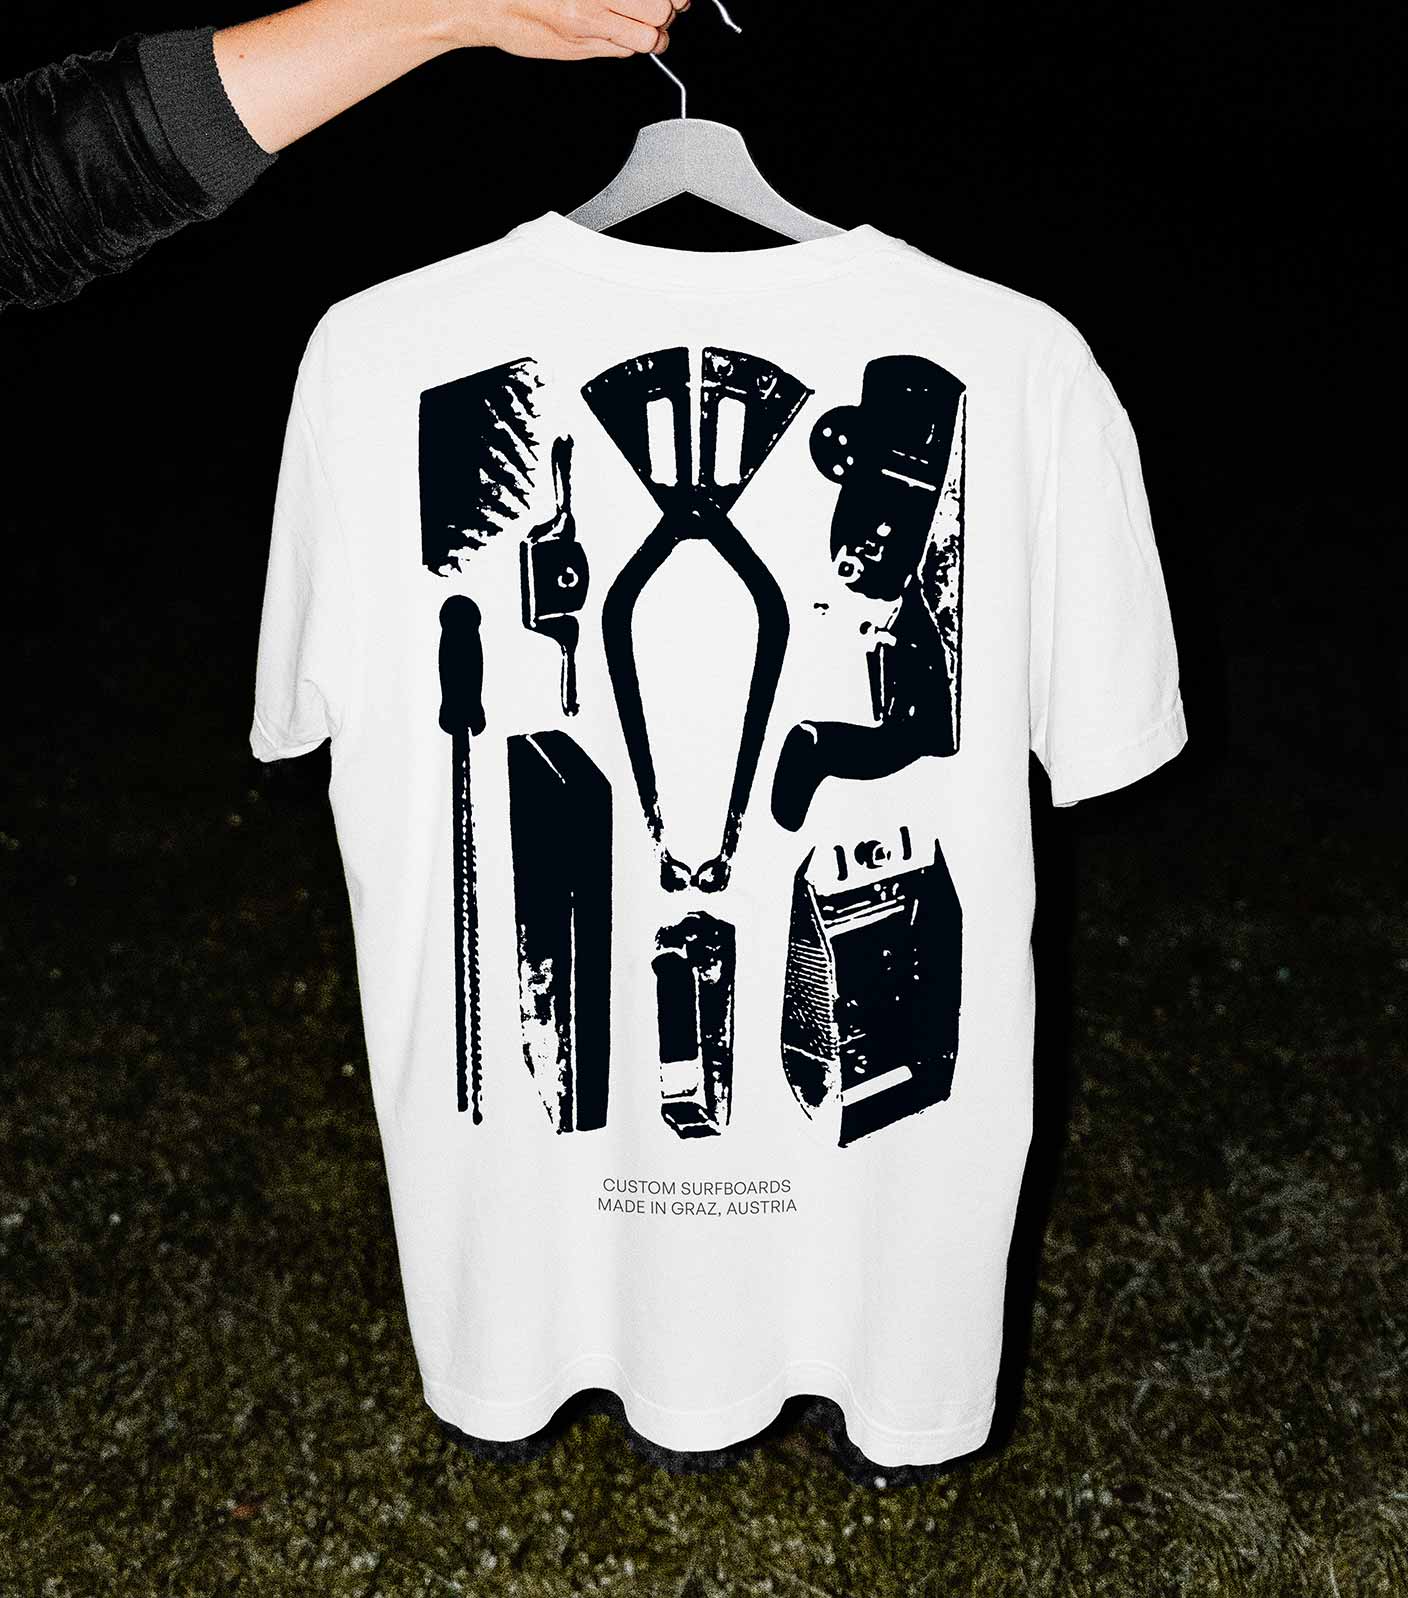 A hand holding a black hanger with a white t-shirt on it that has high contrast black graphics of shape tools as a backprint. The photo is shot with flash in the night where only the t-shirt and the hand and a little of the grass floor is visible.